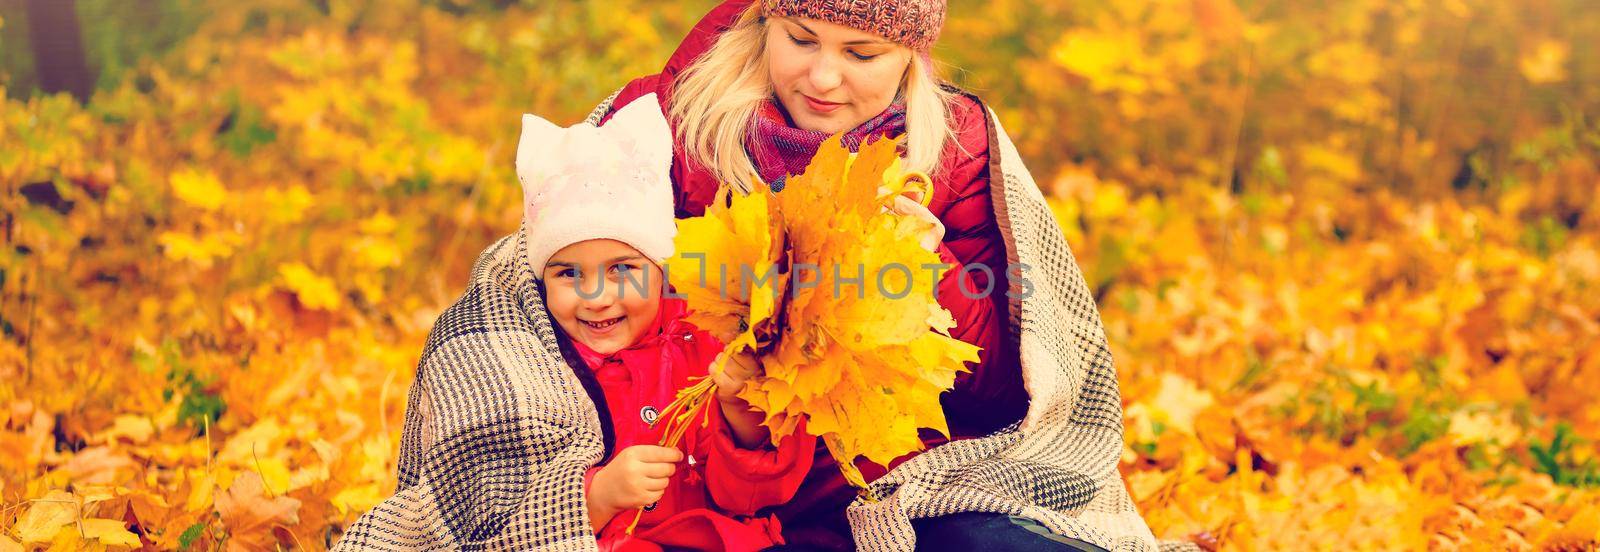 Mother and child hands in the autumn park in the middle of the orange fallen leaves